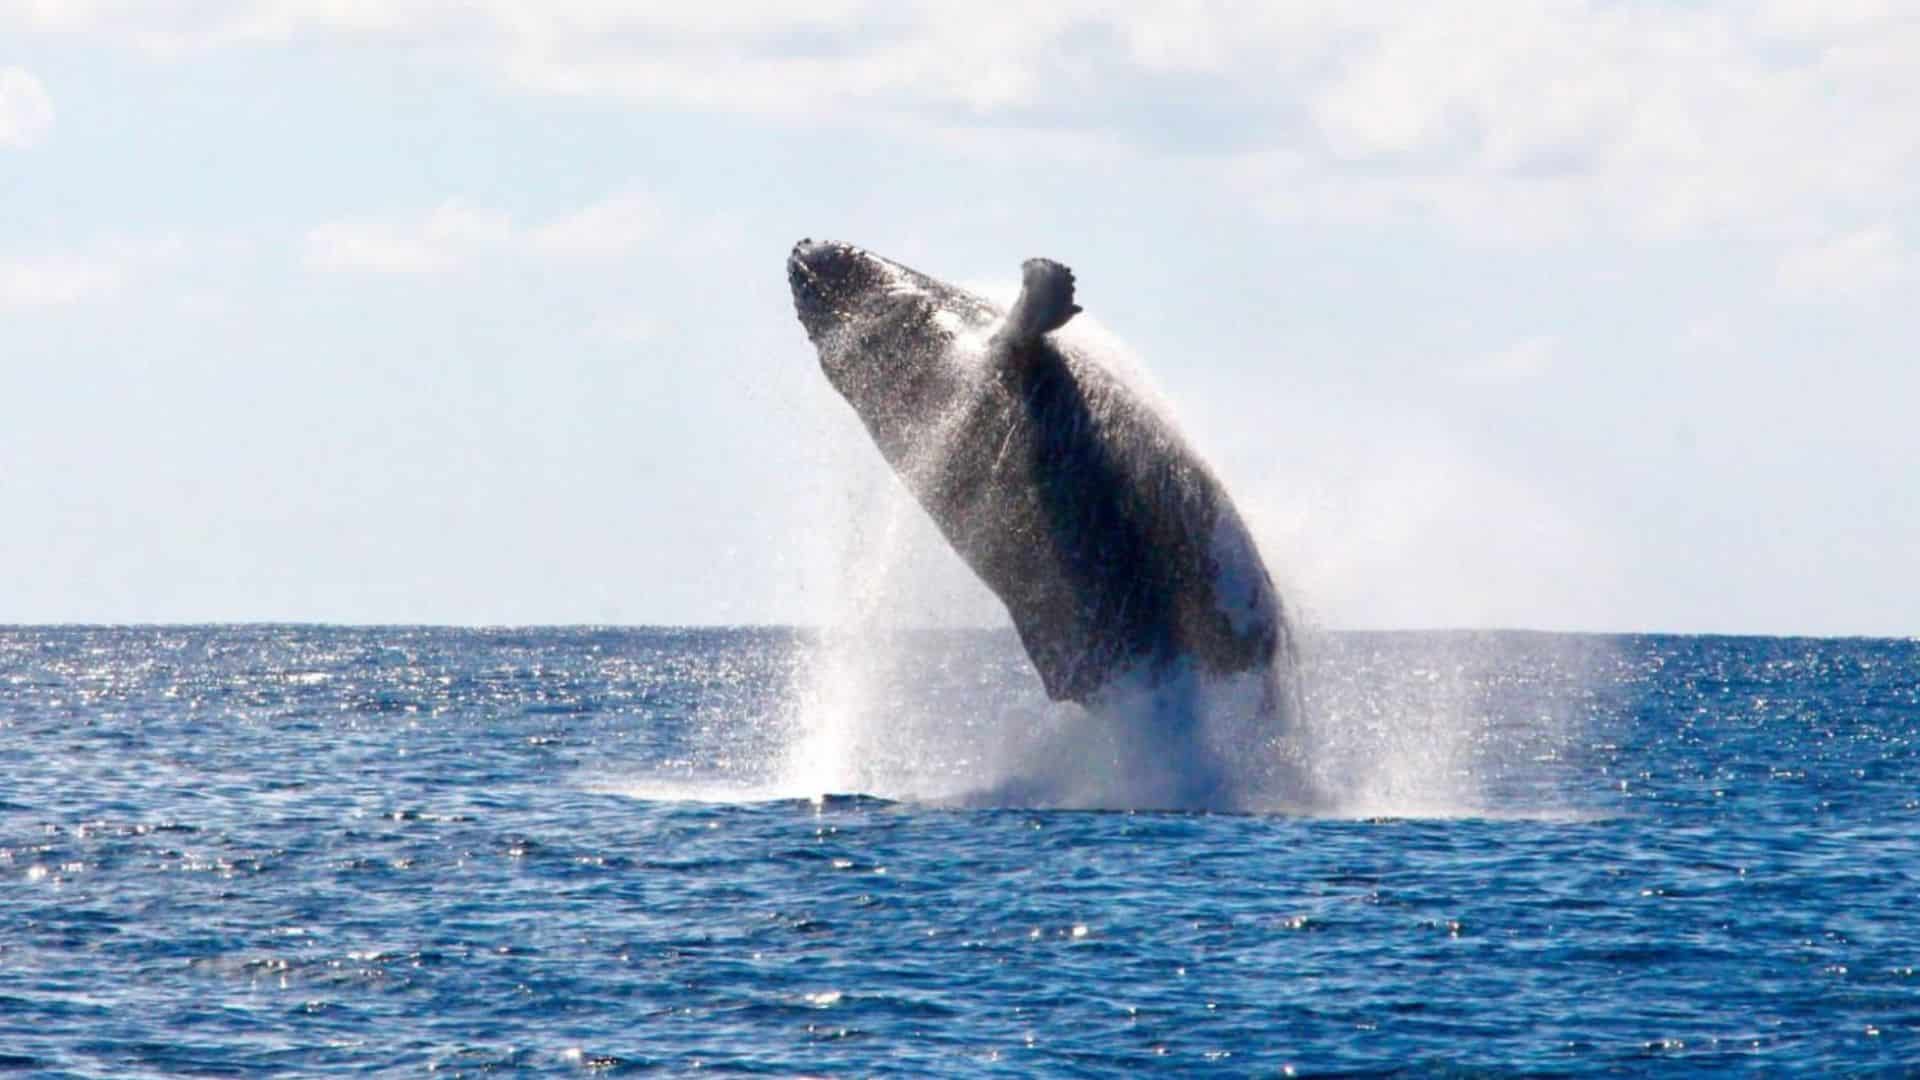 A whale leaps out of the water